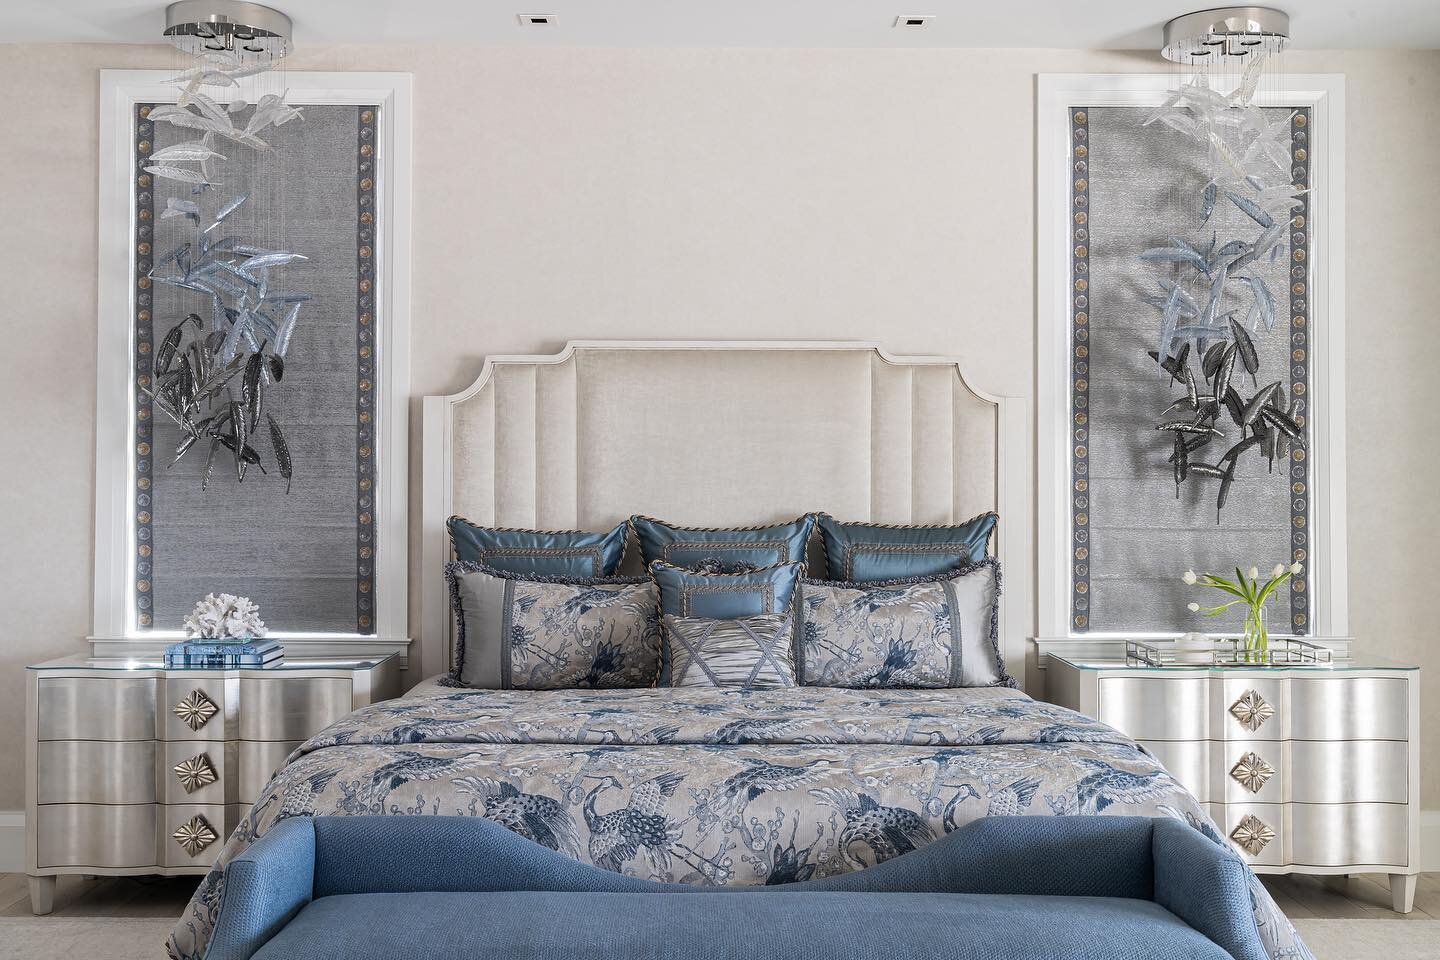 Since it&rsquo;s raining all day and I have the &ldquo;blues&rdquo;- here&rsquo;s a stupidly yummy perfectly symmetrical shot of the primary bedroom at our #bluelooksgoodonyou project on Manalapan Island 💙

Design @erinacantuinteriors 
📸 @venjhamin